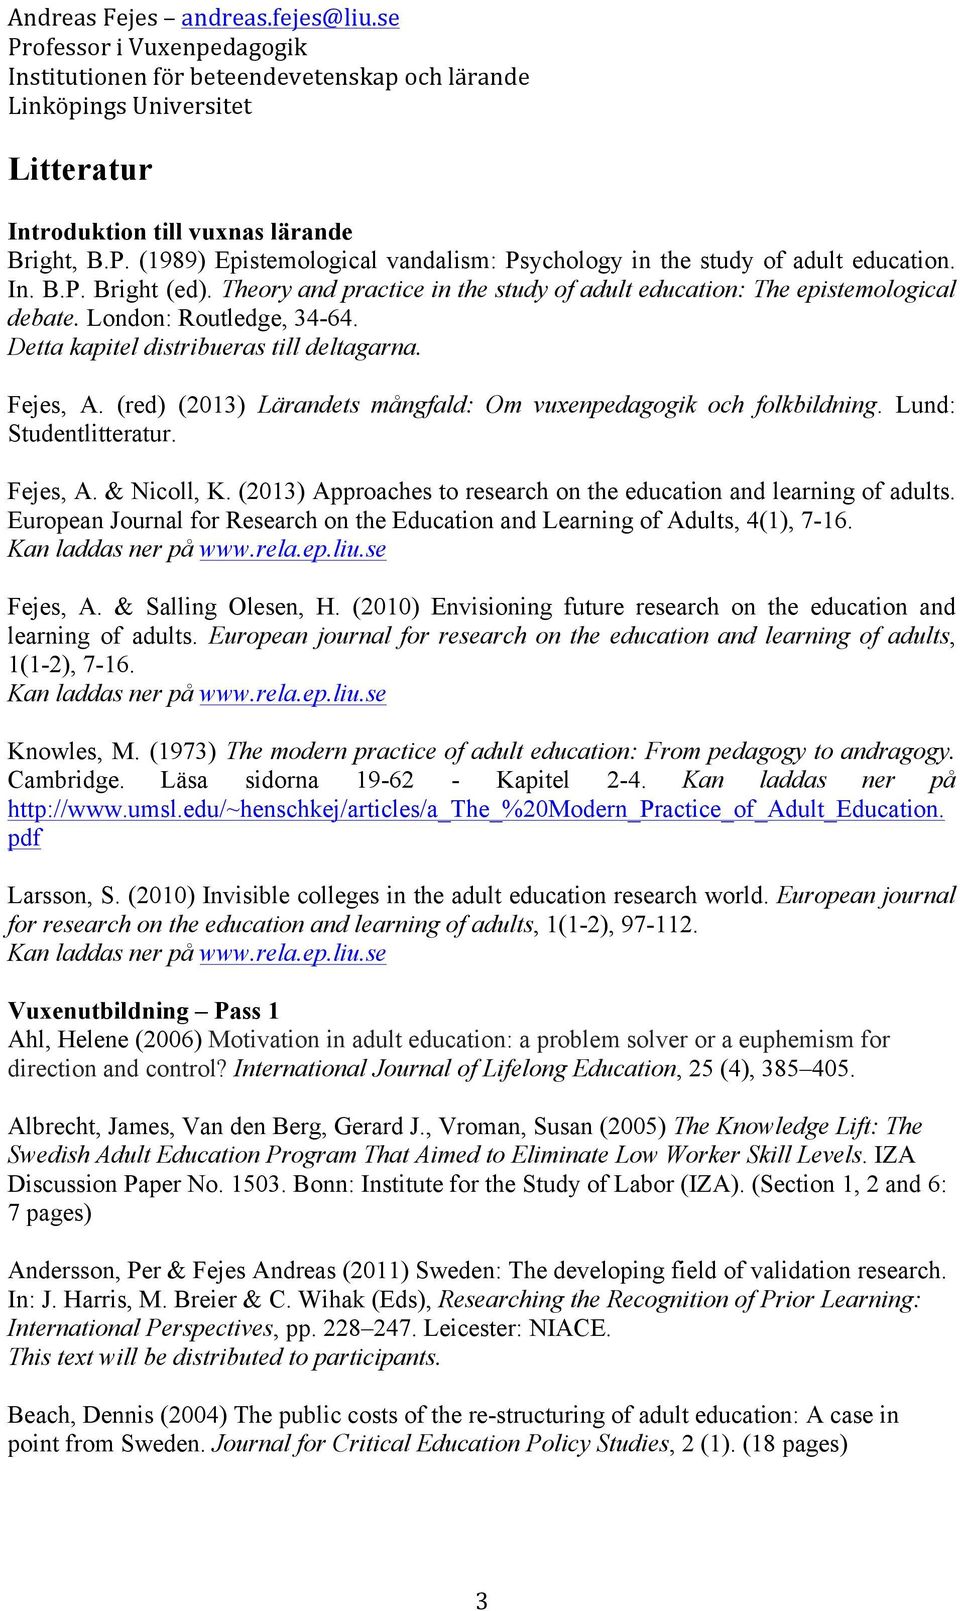 (red) (2013) Lärandets mångfald: Om vuxenpedagogik och folkbildning. Lund: Studentlitteratur. Fejes, A. & Nicoll, K. (2013) Approaches to research on the education and learning of adults.